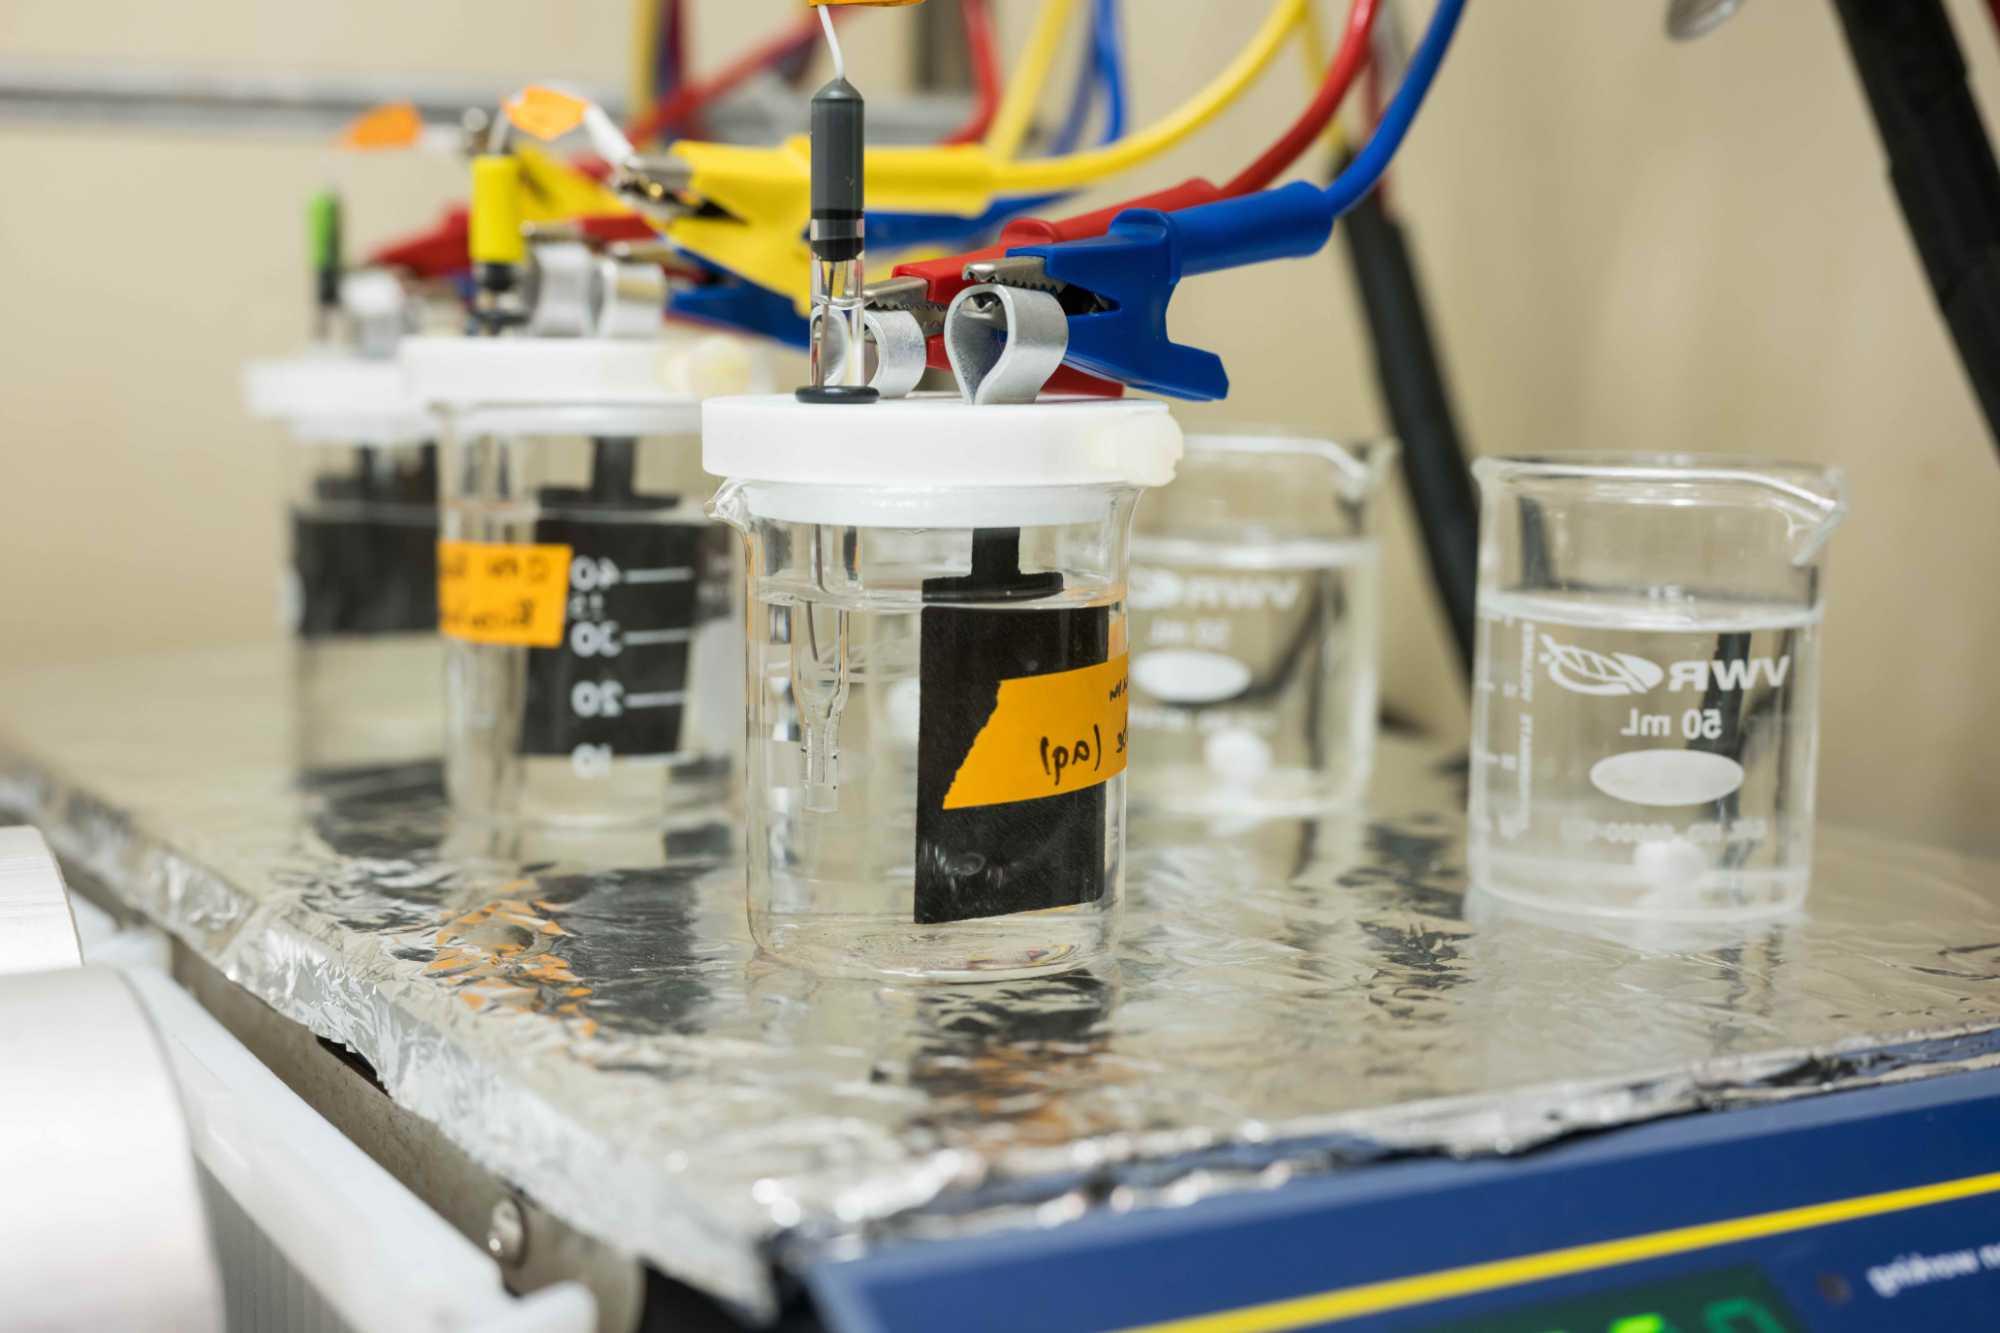 PFAS chemical remediation depicted with five beakers filled with water and hydrophilic carbon paper with blue, red, and yellow wires and jumper cable-style clamps affixed to them, all atop a scale covered with aluminum foil.